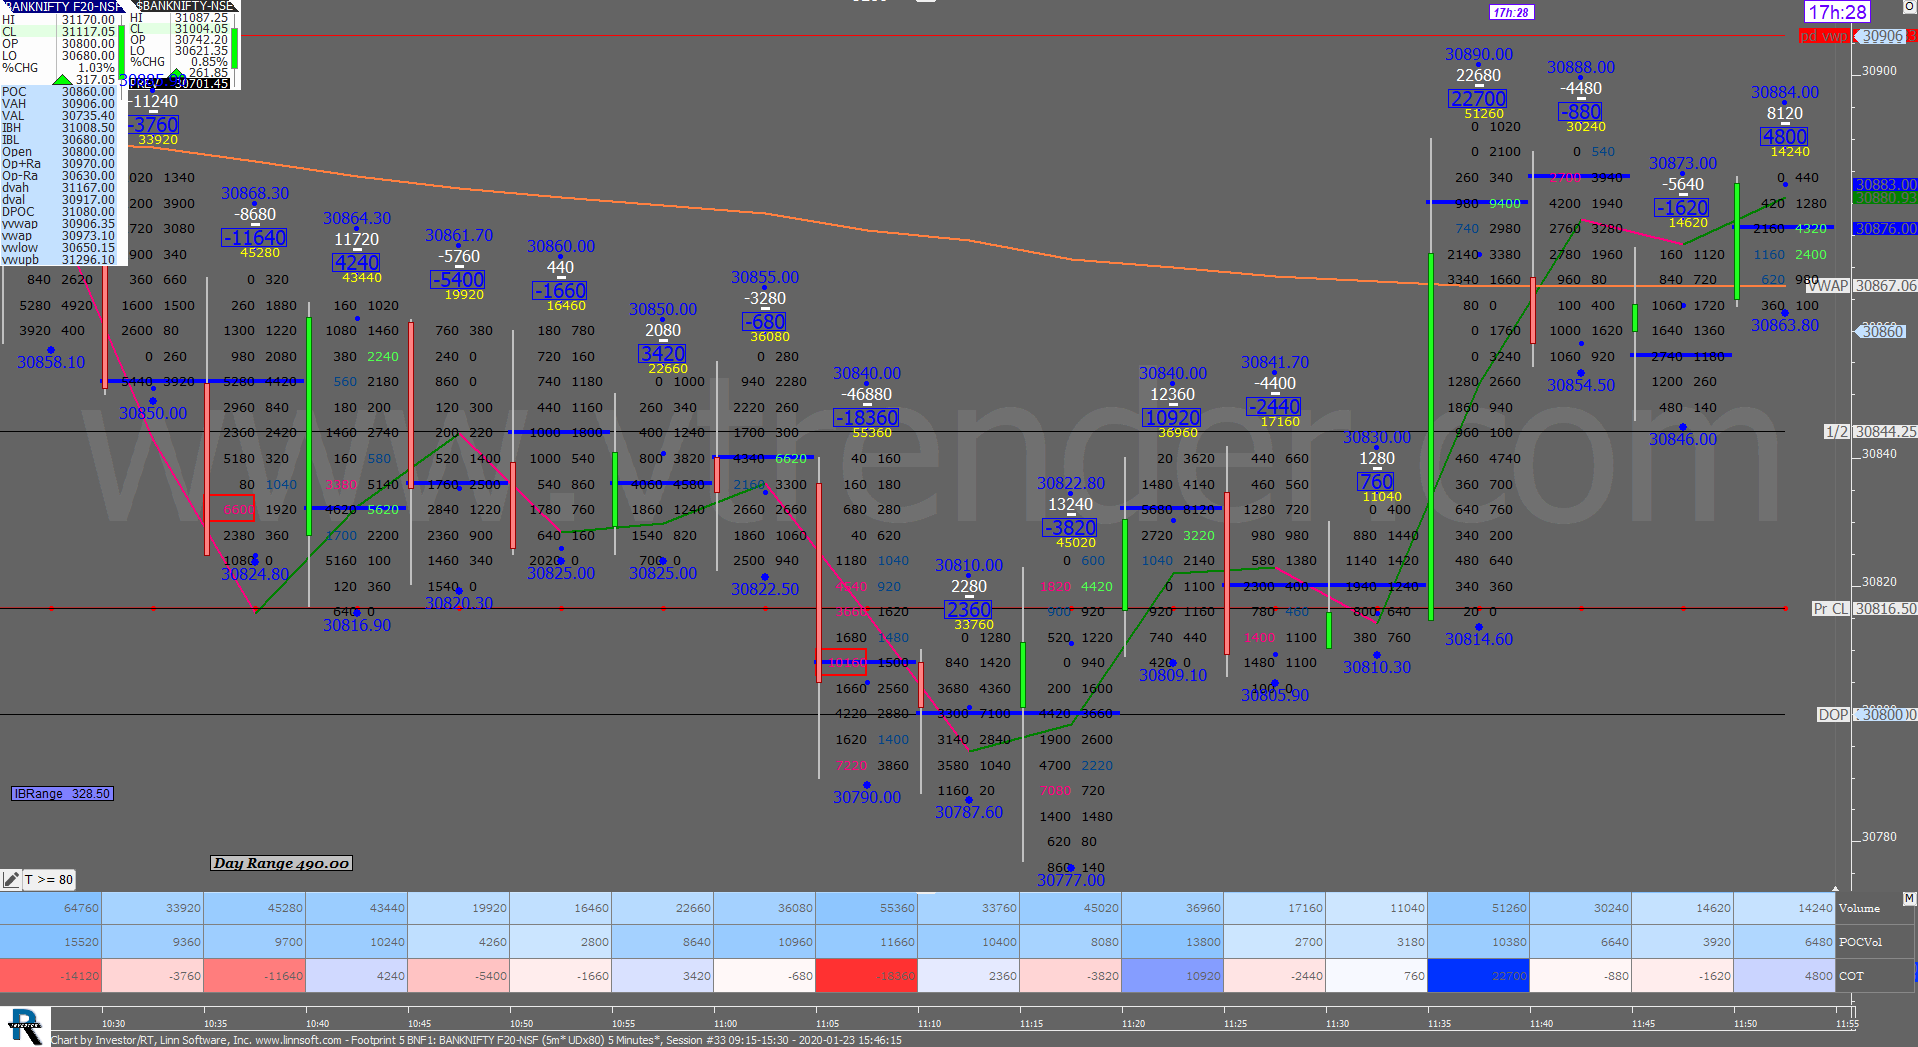 2 31 Order Flow Charts Dated 23Rd Jan 2020 (5 Mins) Banknifty Futures, Day Trading, Intraday Trading, Intraday Trading Strategies, Nifty Futures, Order Flow Analysis, Support And Resistance, Trading Strategies, Volume Profile Trading